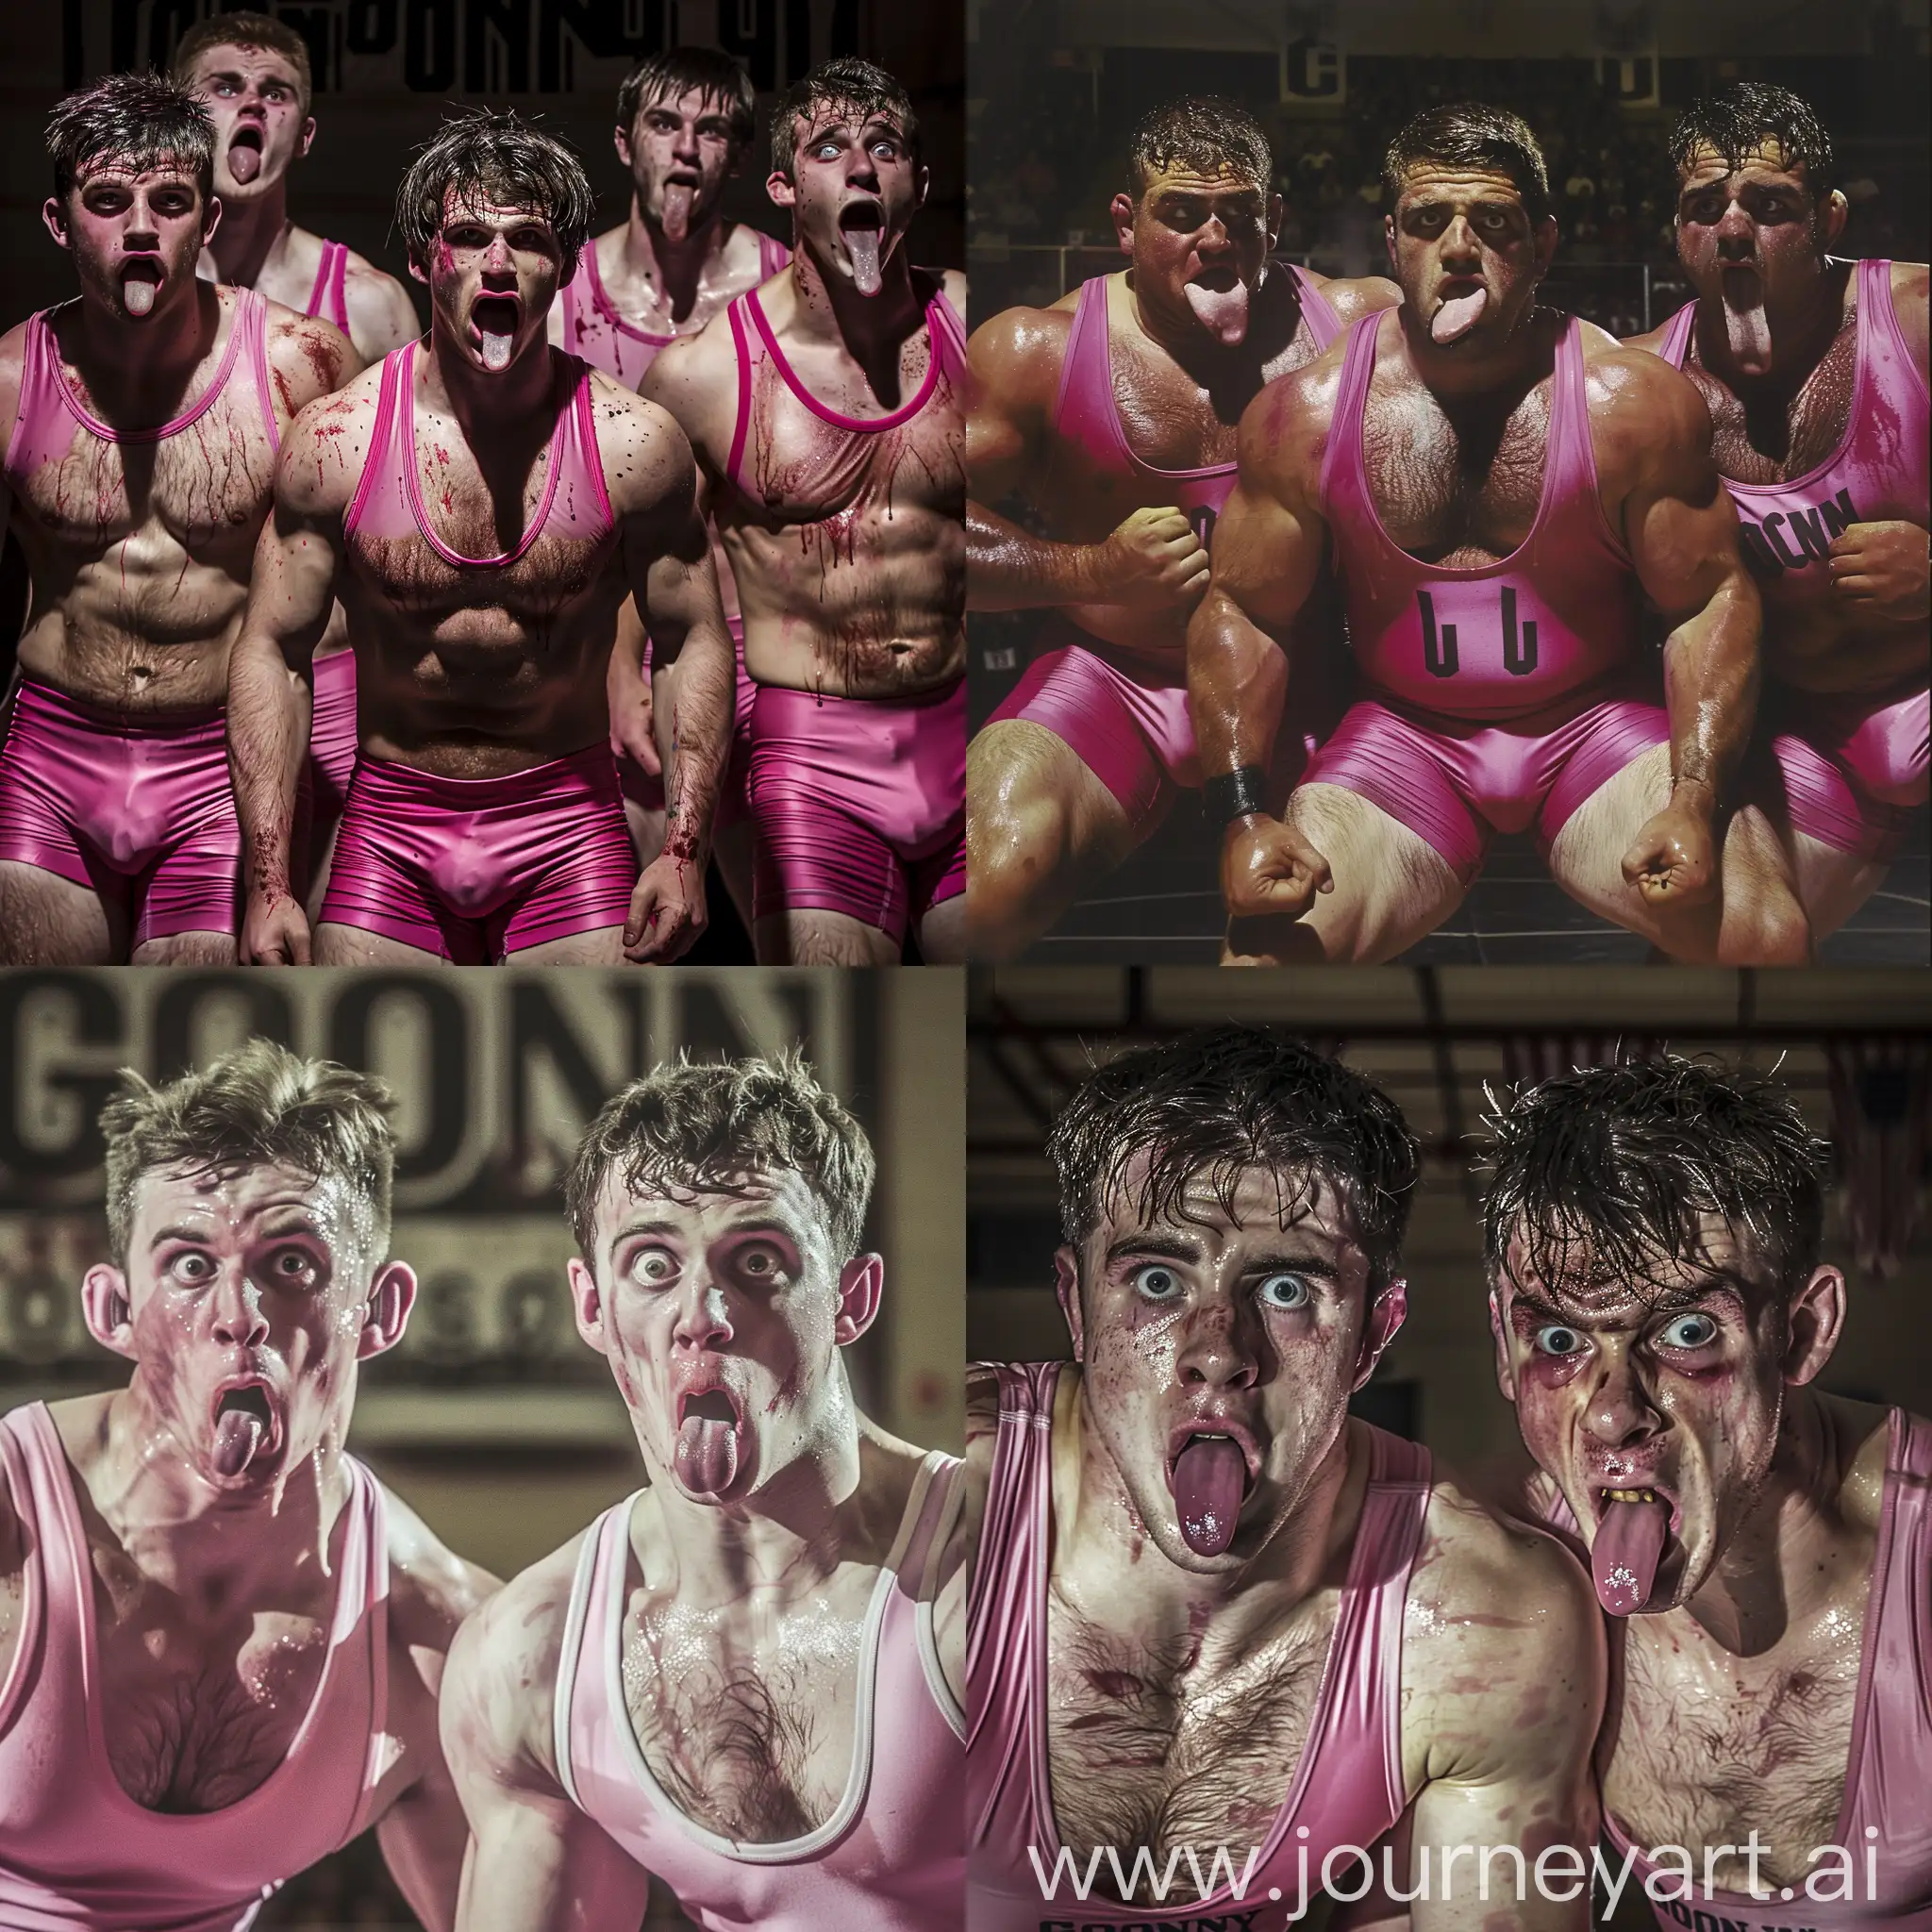 massively muscular college wrestlers. The picture is in color. They play for "goony u". Their eyes are vacant and their tounges are hanging out of their mouths. they are gooning. They have sweated through the pink singlets. 